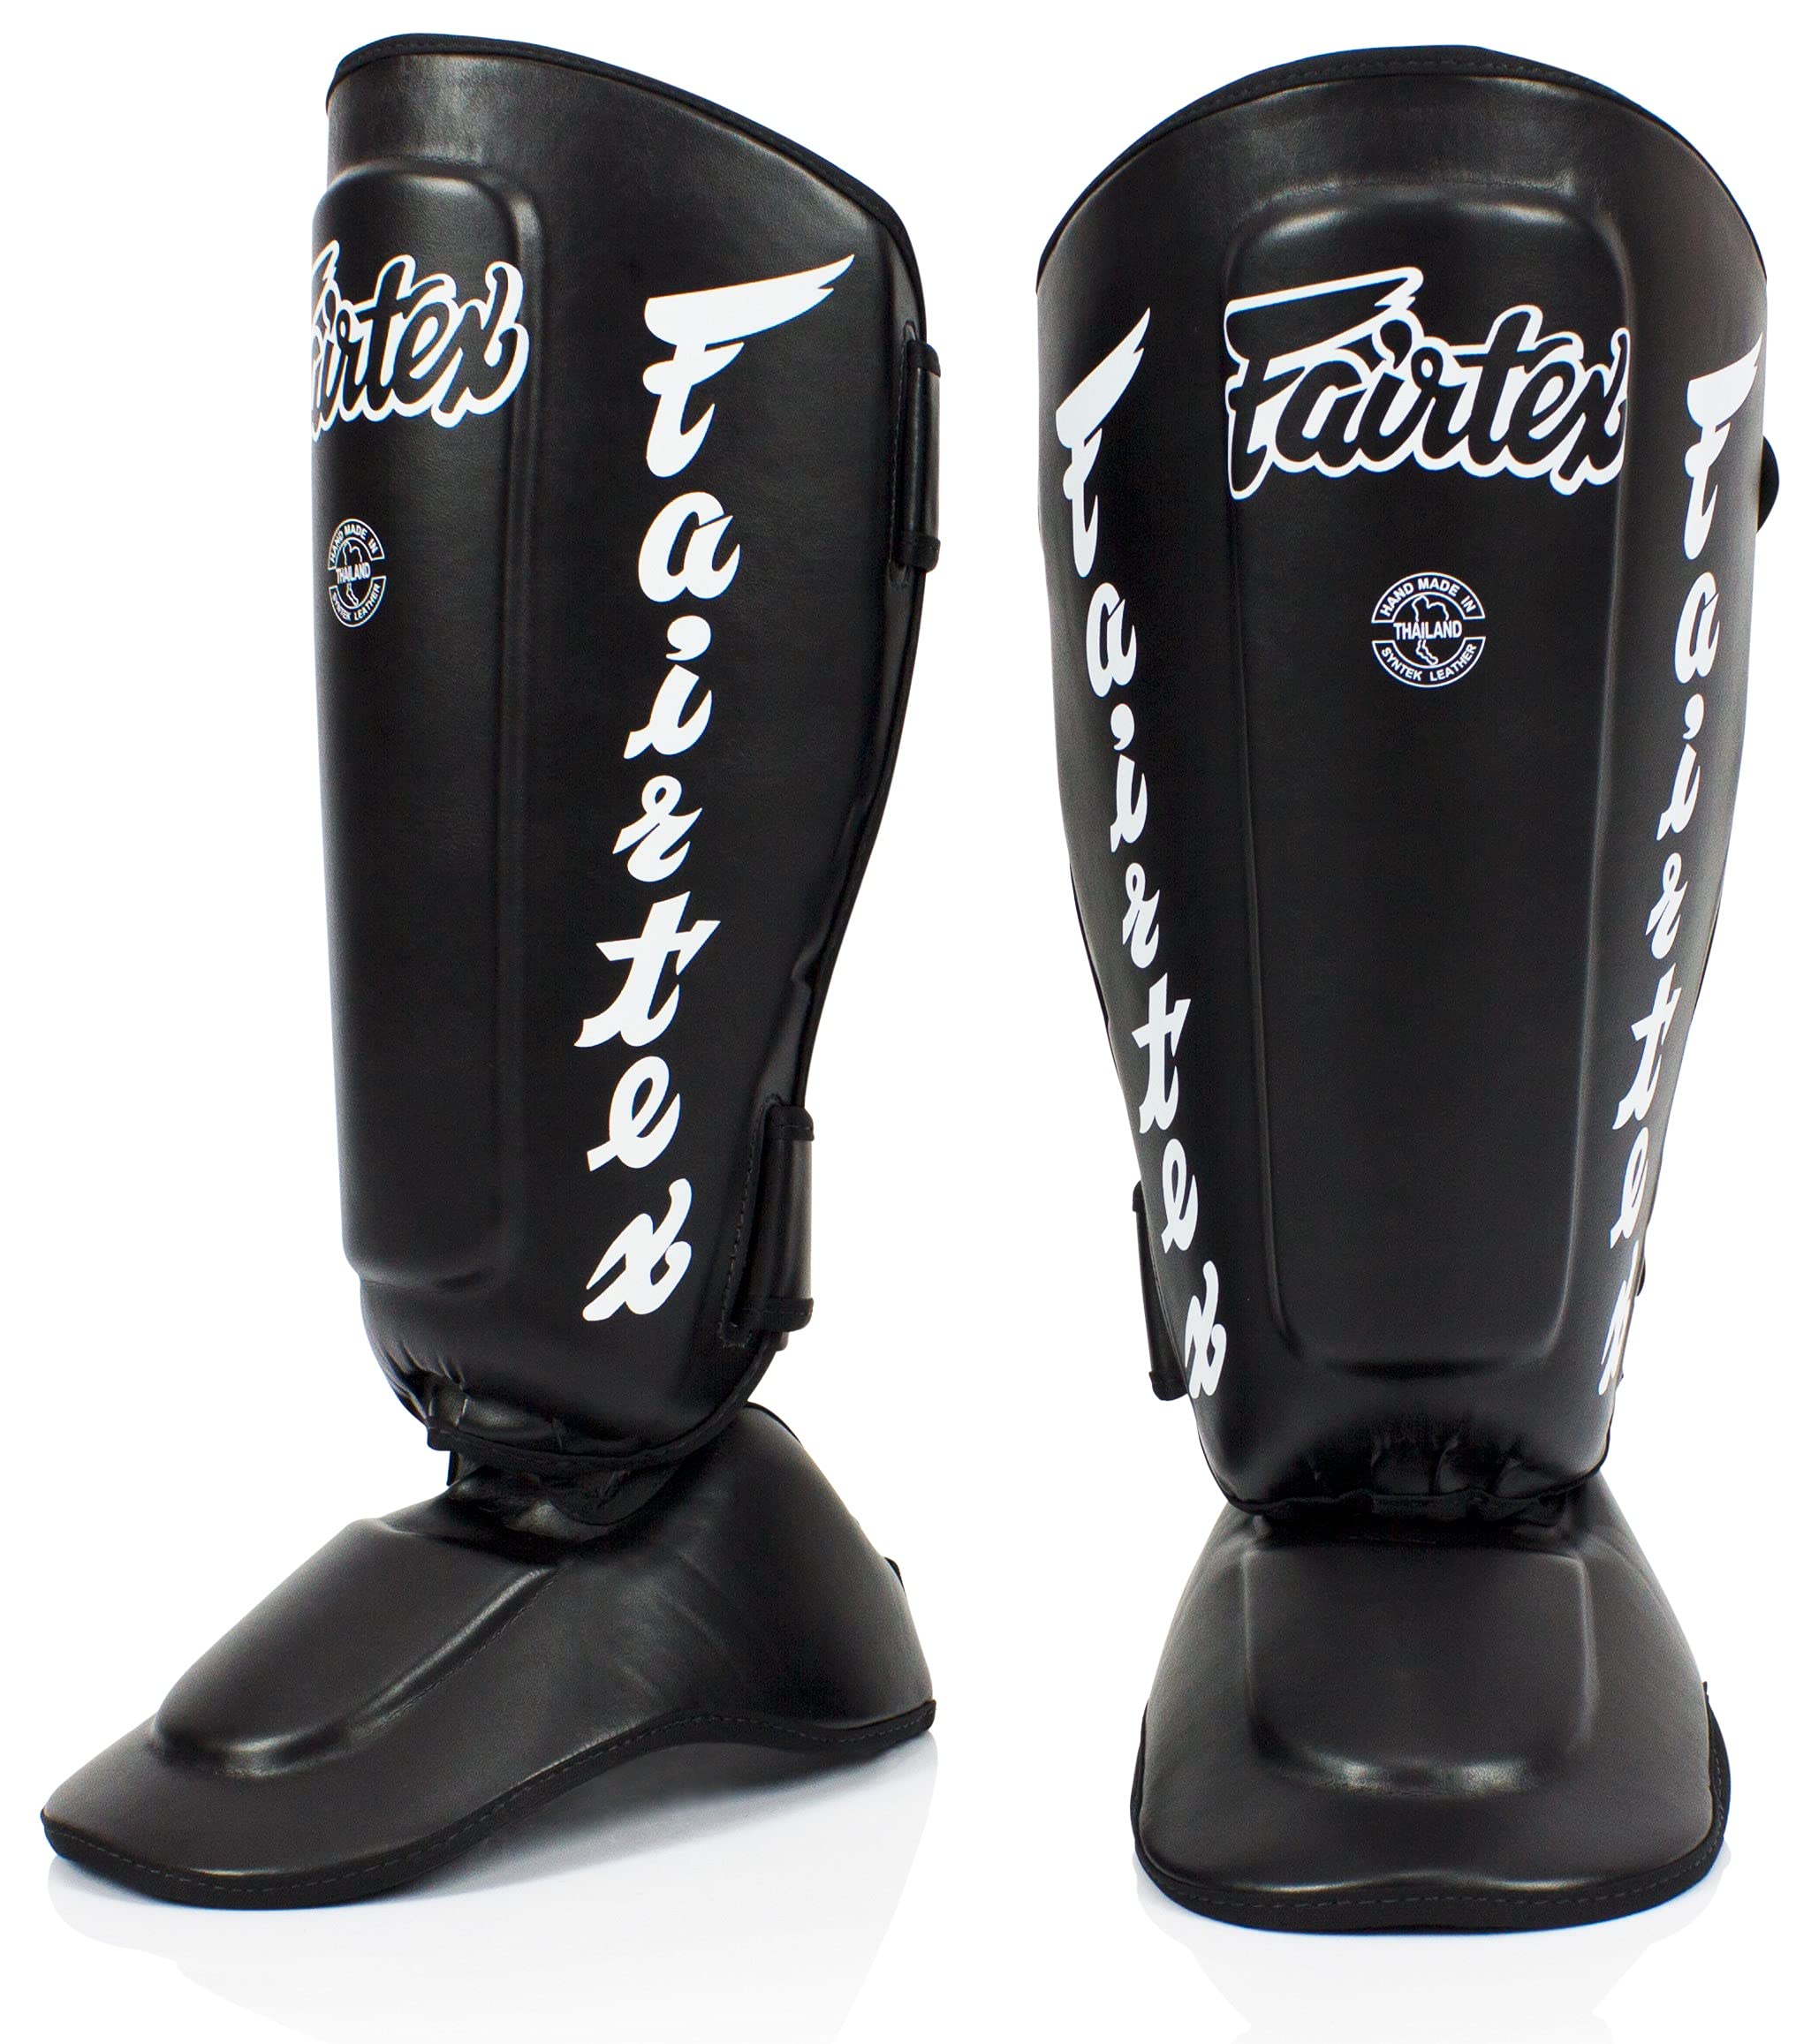 Fairtex Shin Guards Black Double Padded for a slimline fit - Enso